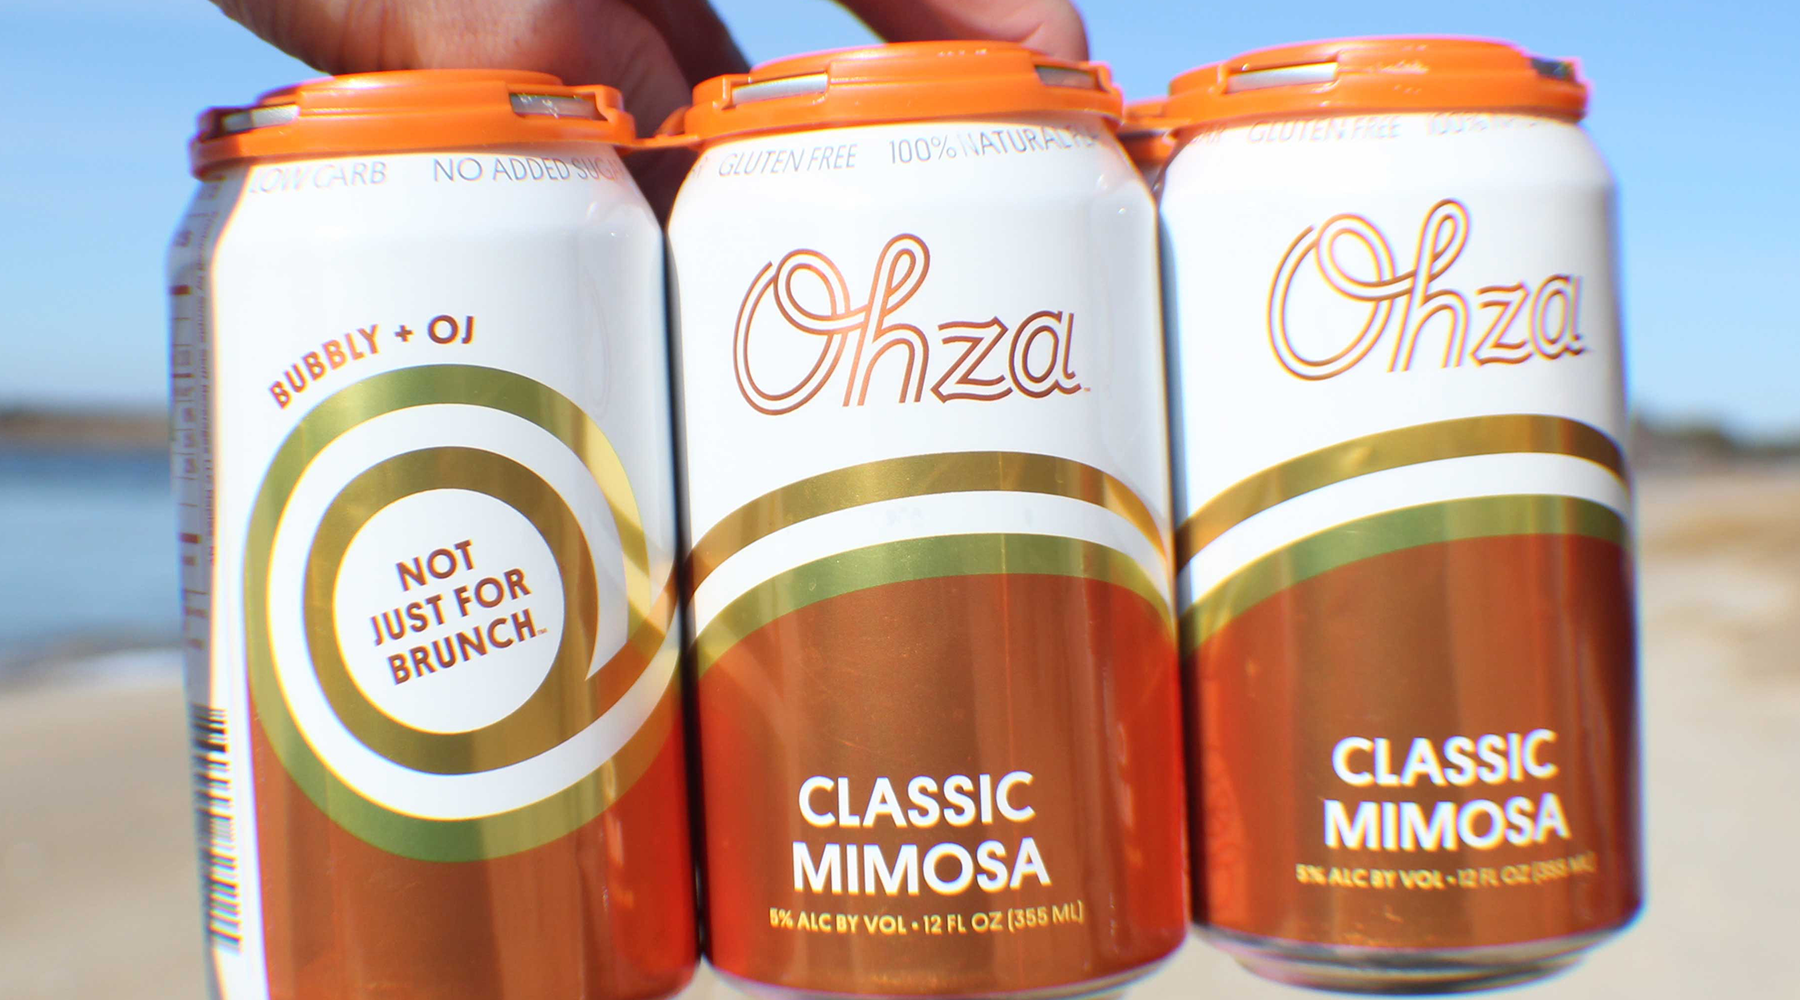 Whatcha Drinkin? A Mimosa from Ohza